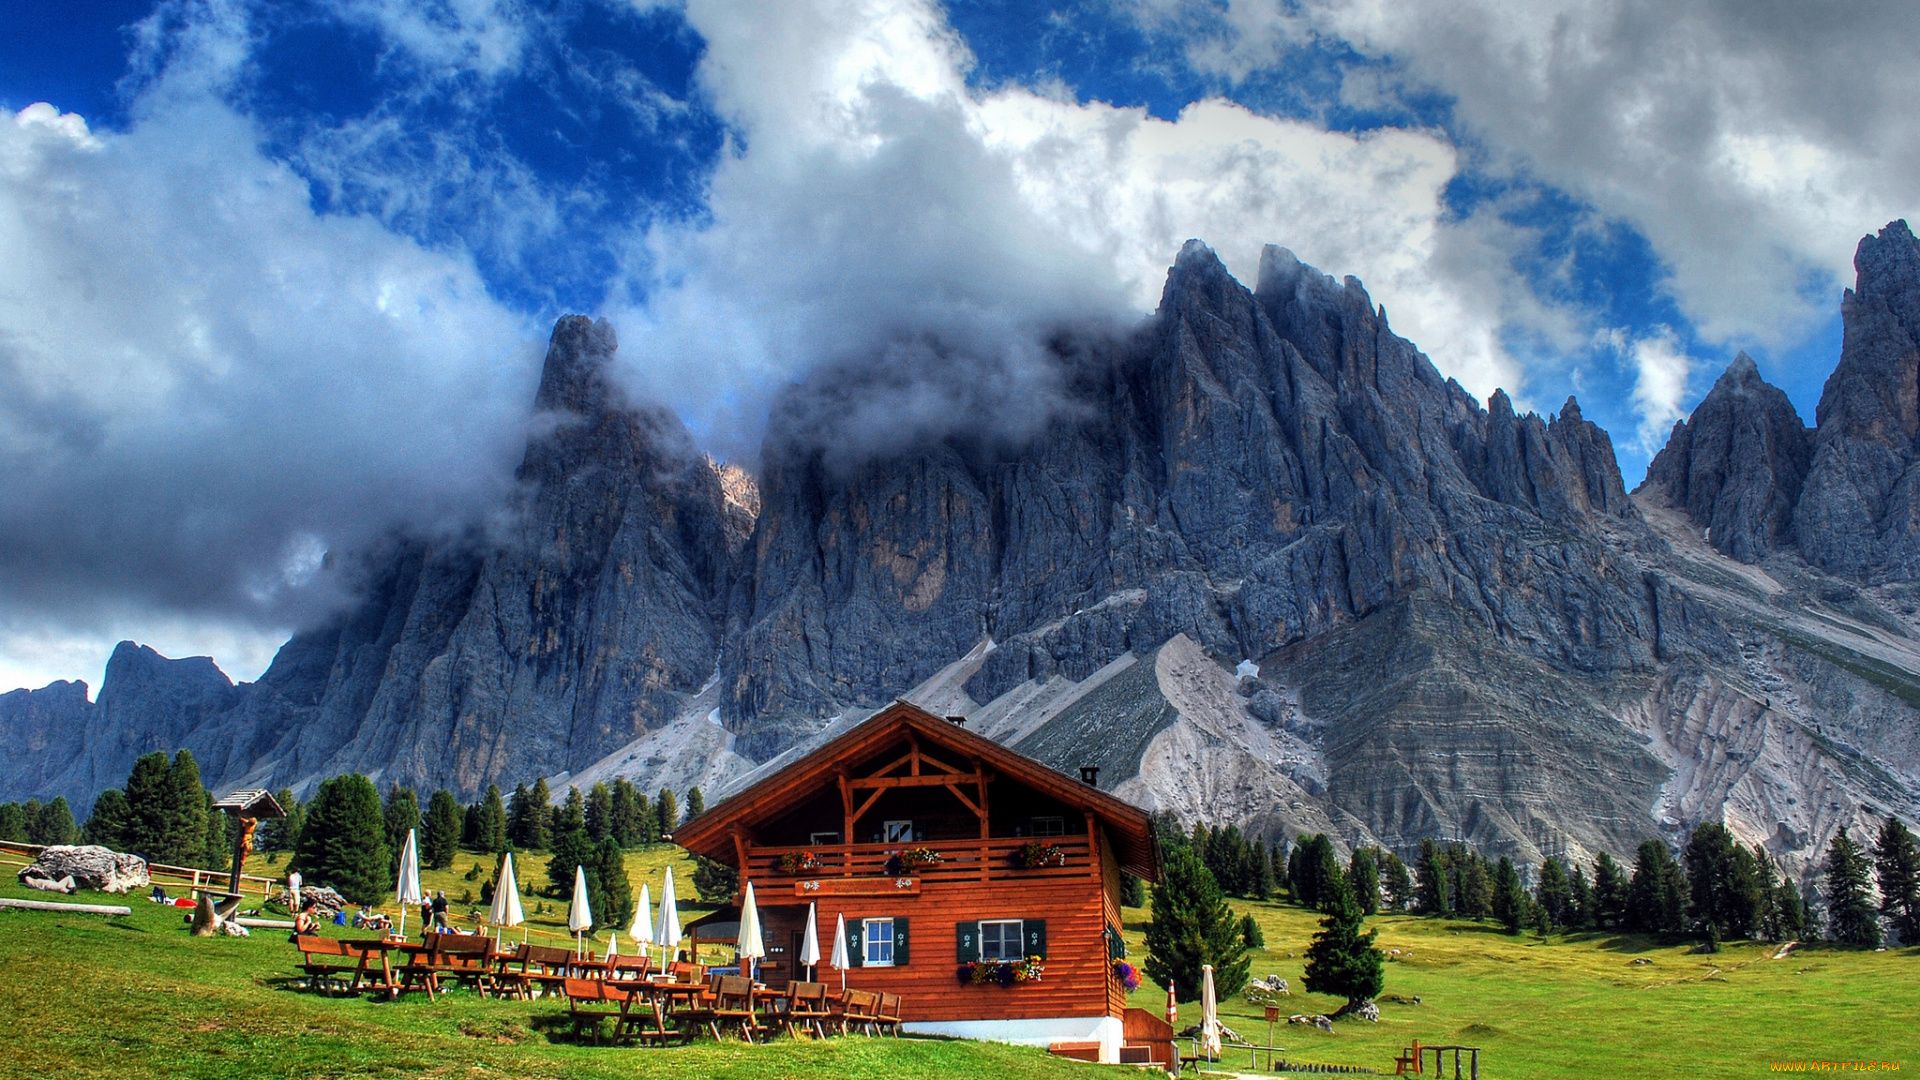 The Cabin In The Mountains Of The Alps